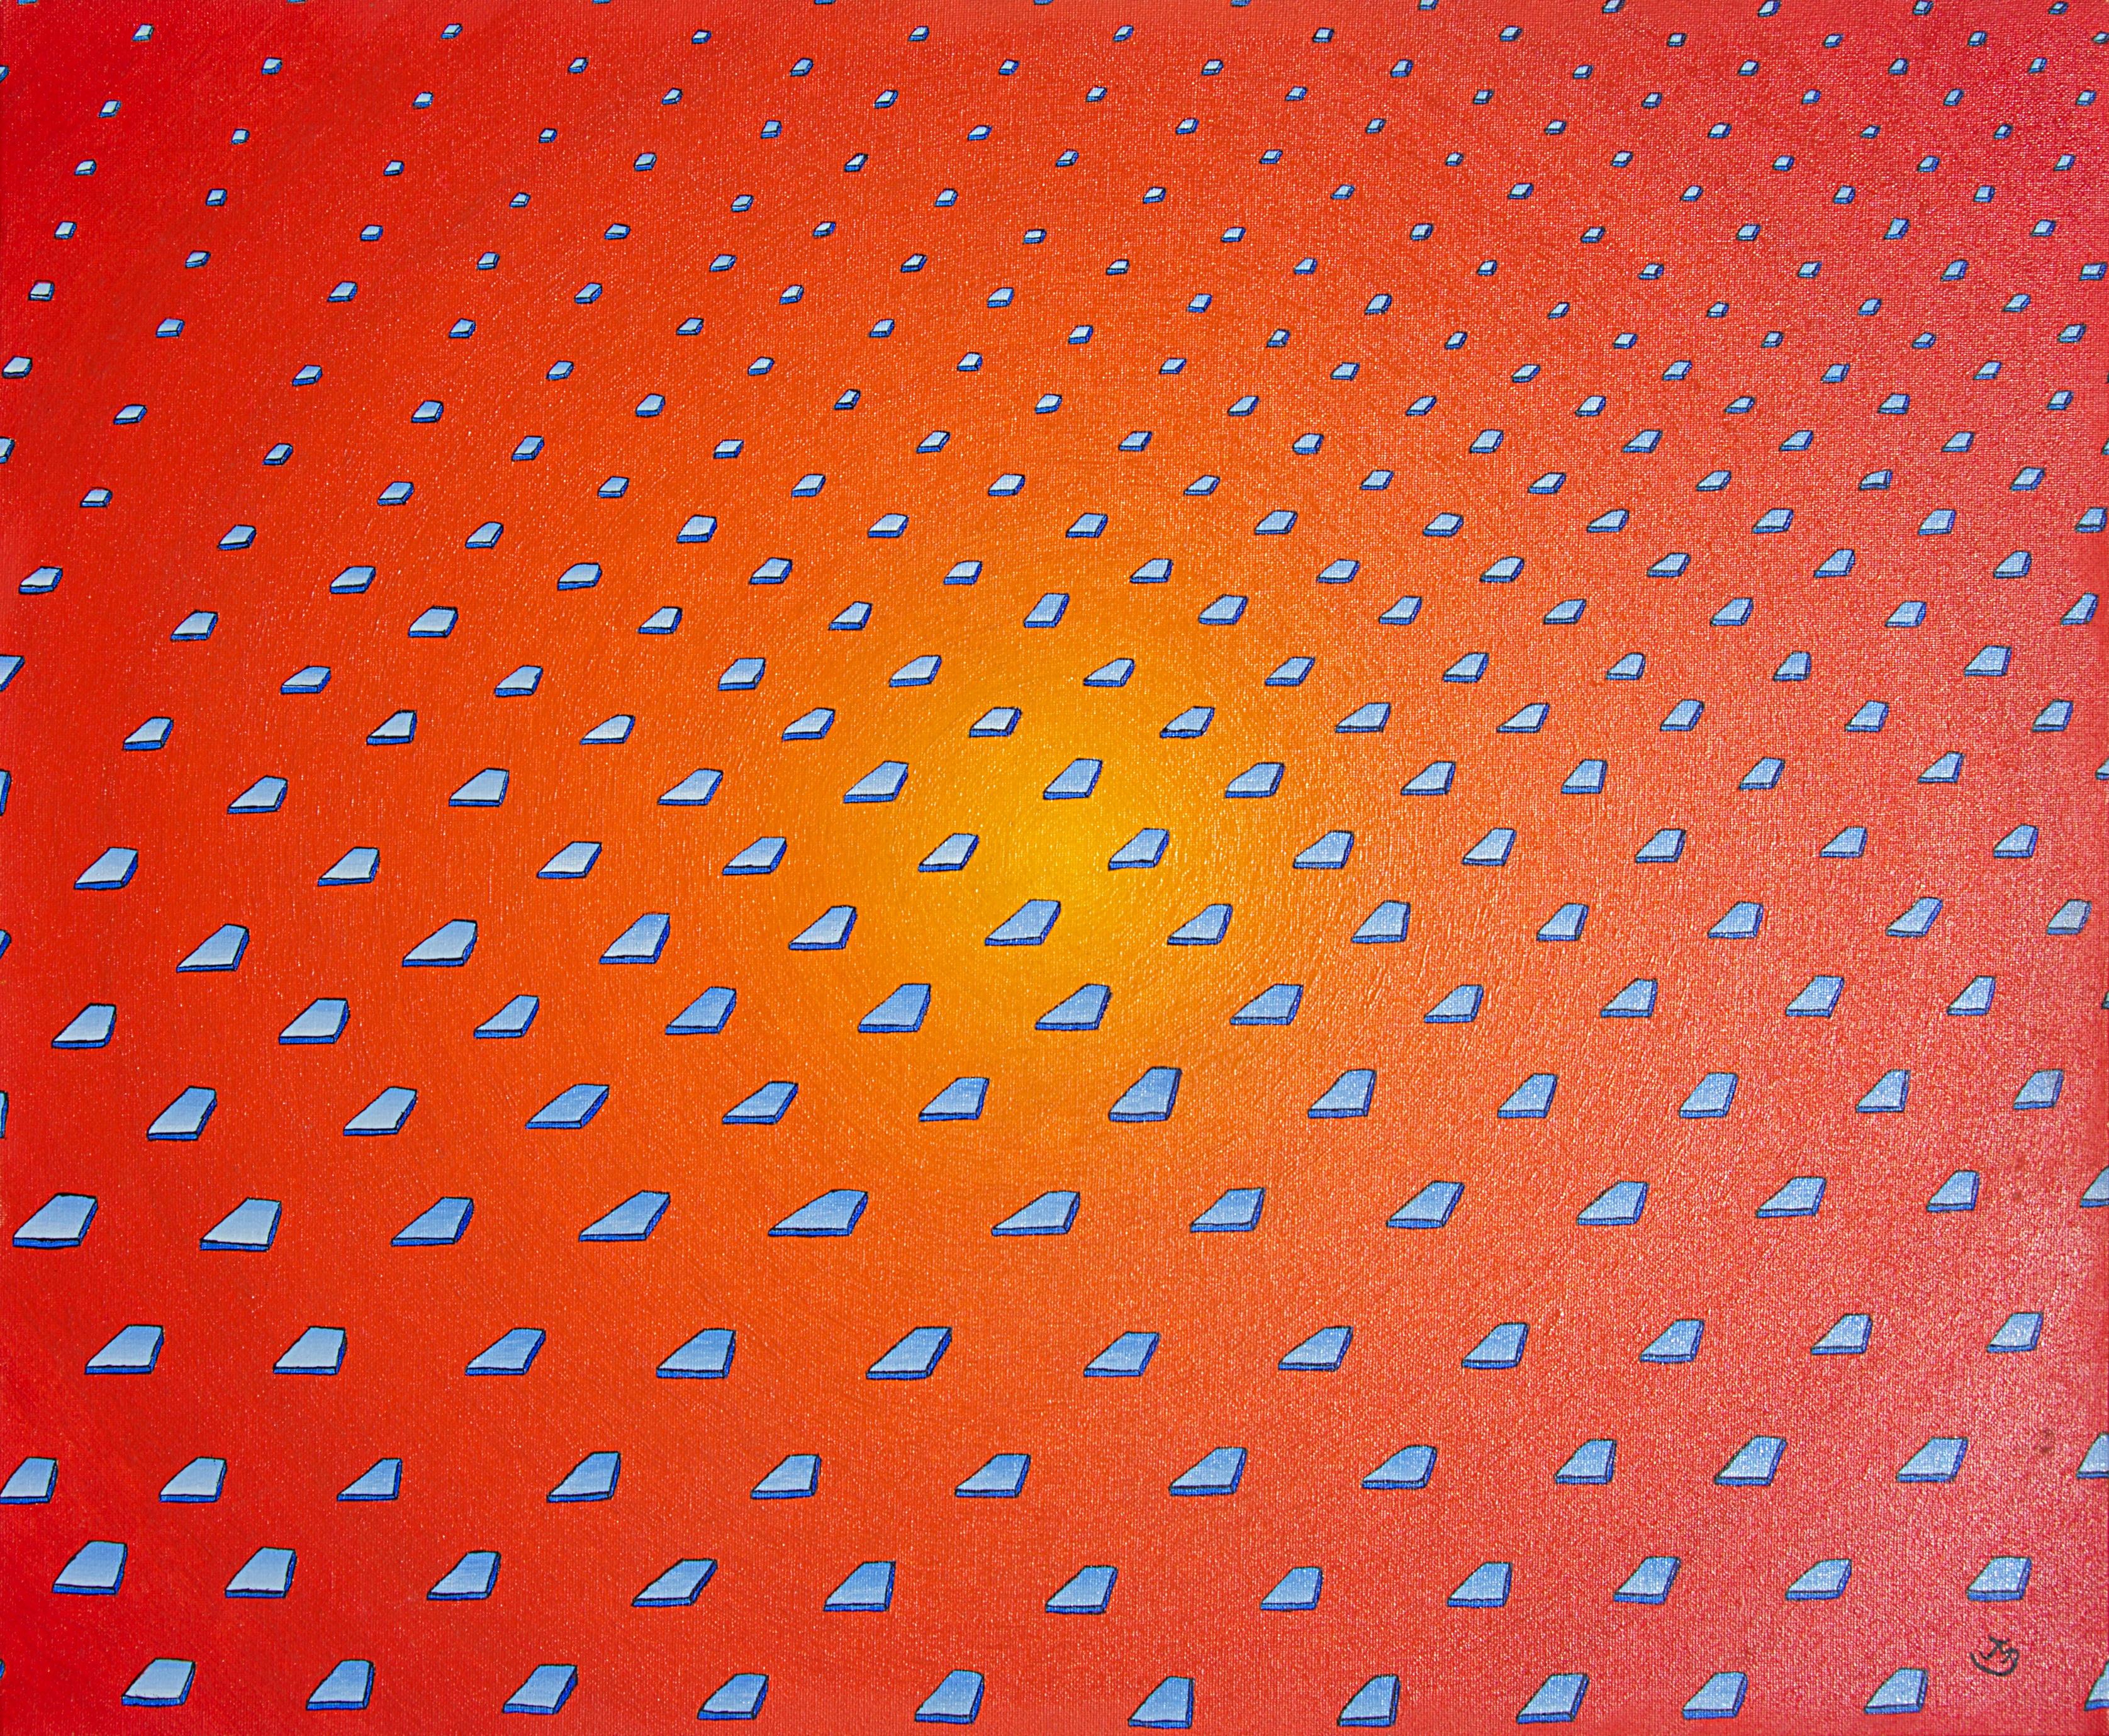 "Without a Net", Floating Glass Tiles on a Radial Orange Gradient Oil Painting